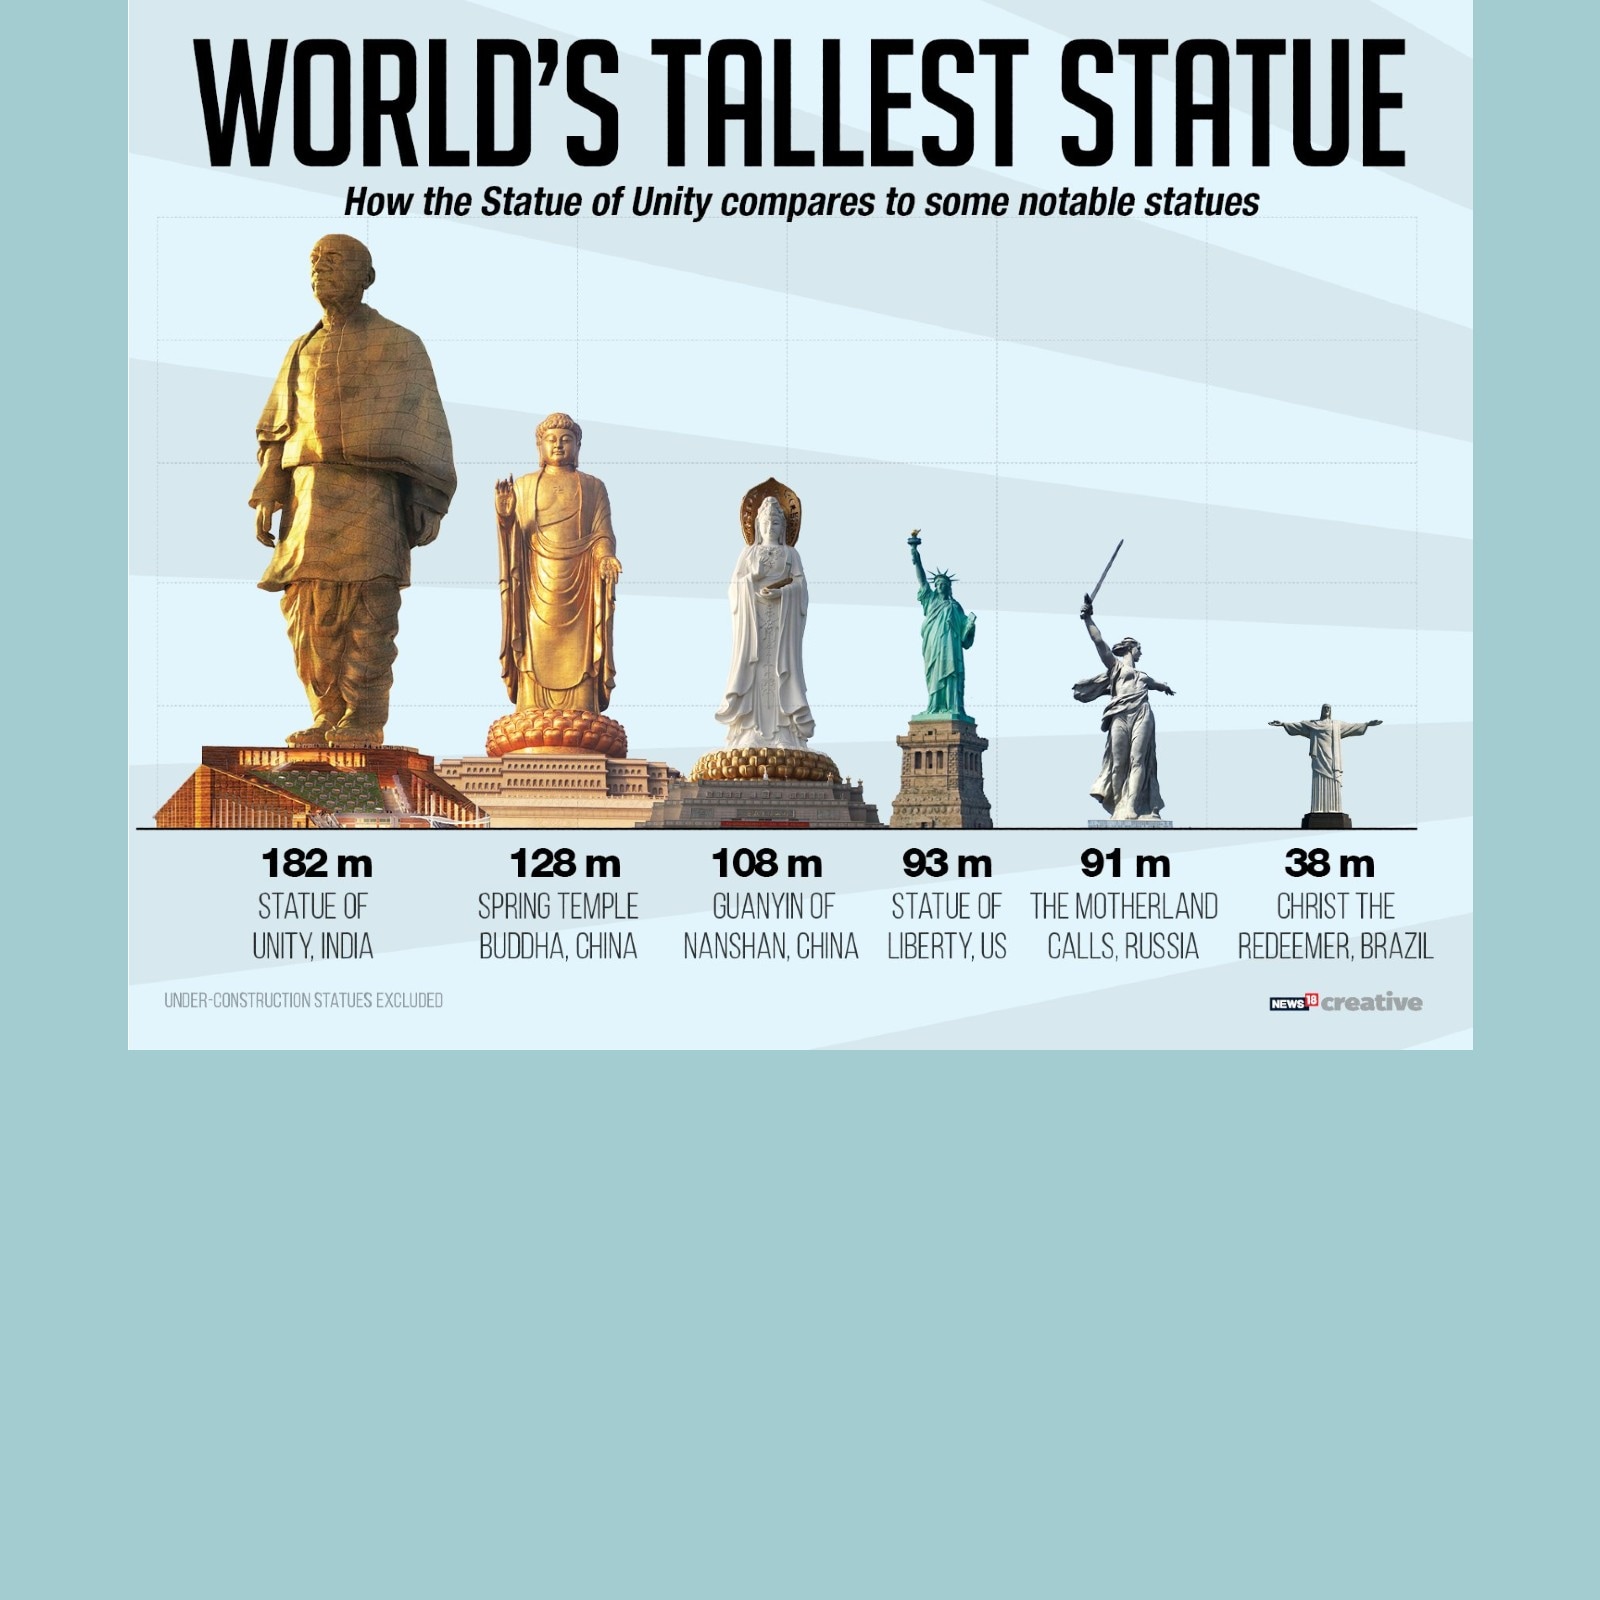 IN PICS: Statue of Unity, The World's Tallest Statue of Sardar Vallabhbhai  Patel - News18